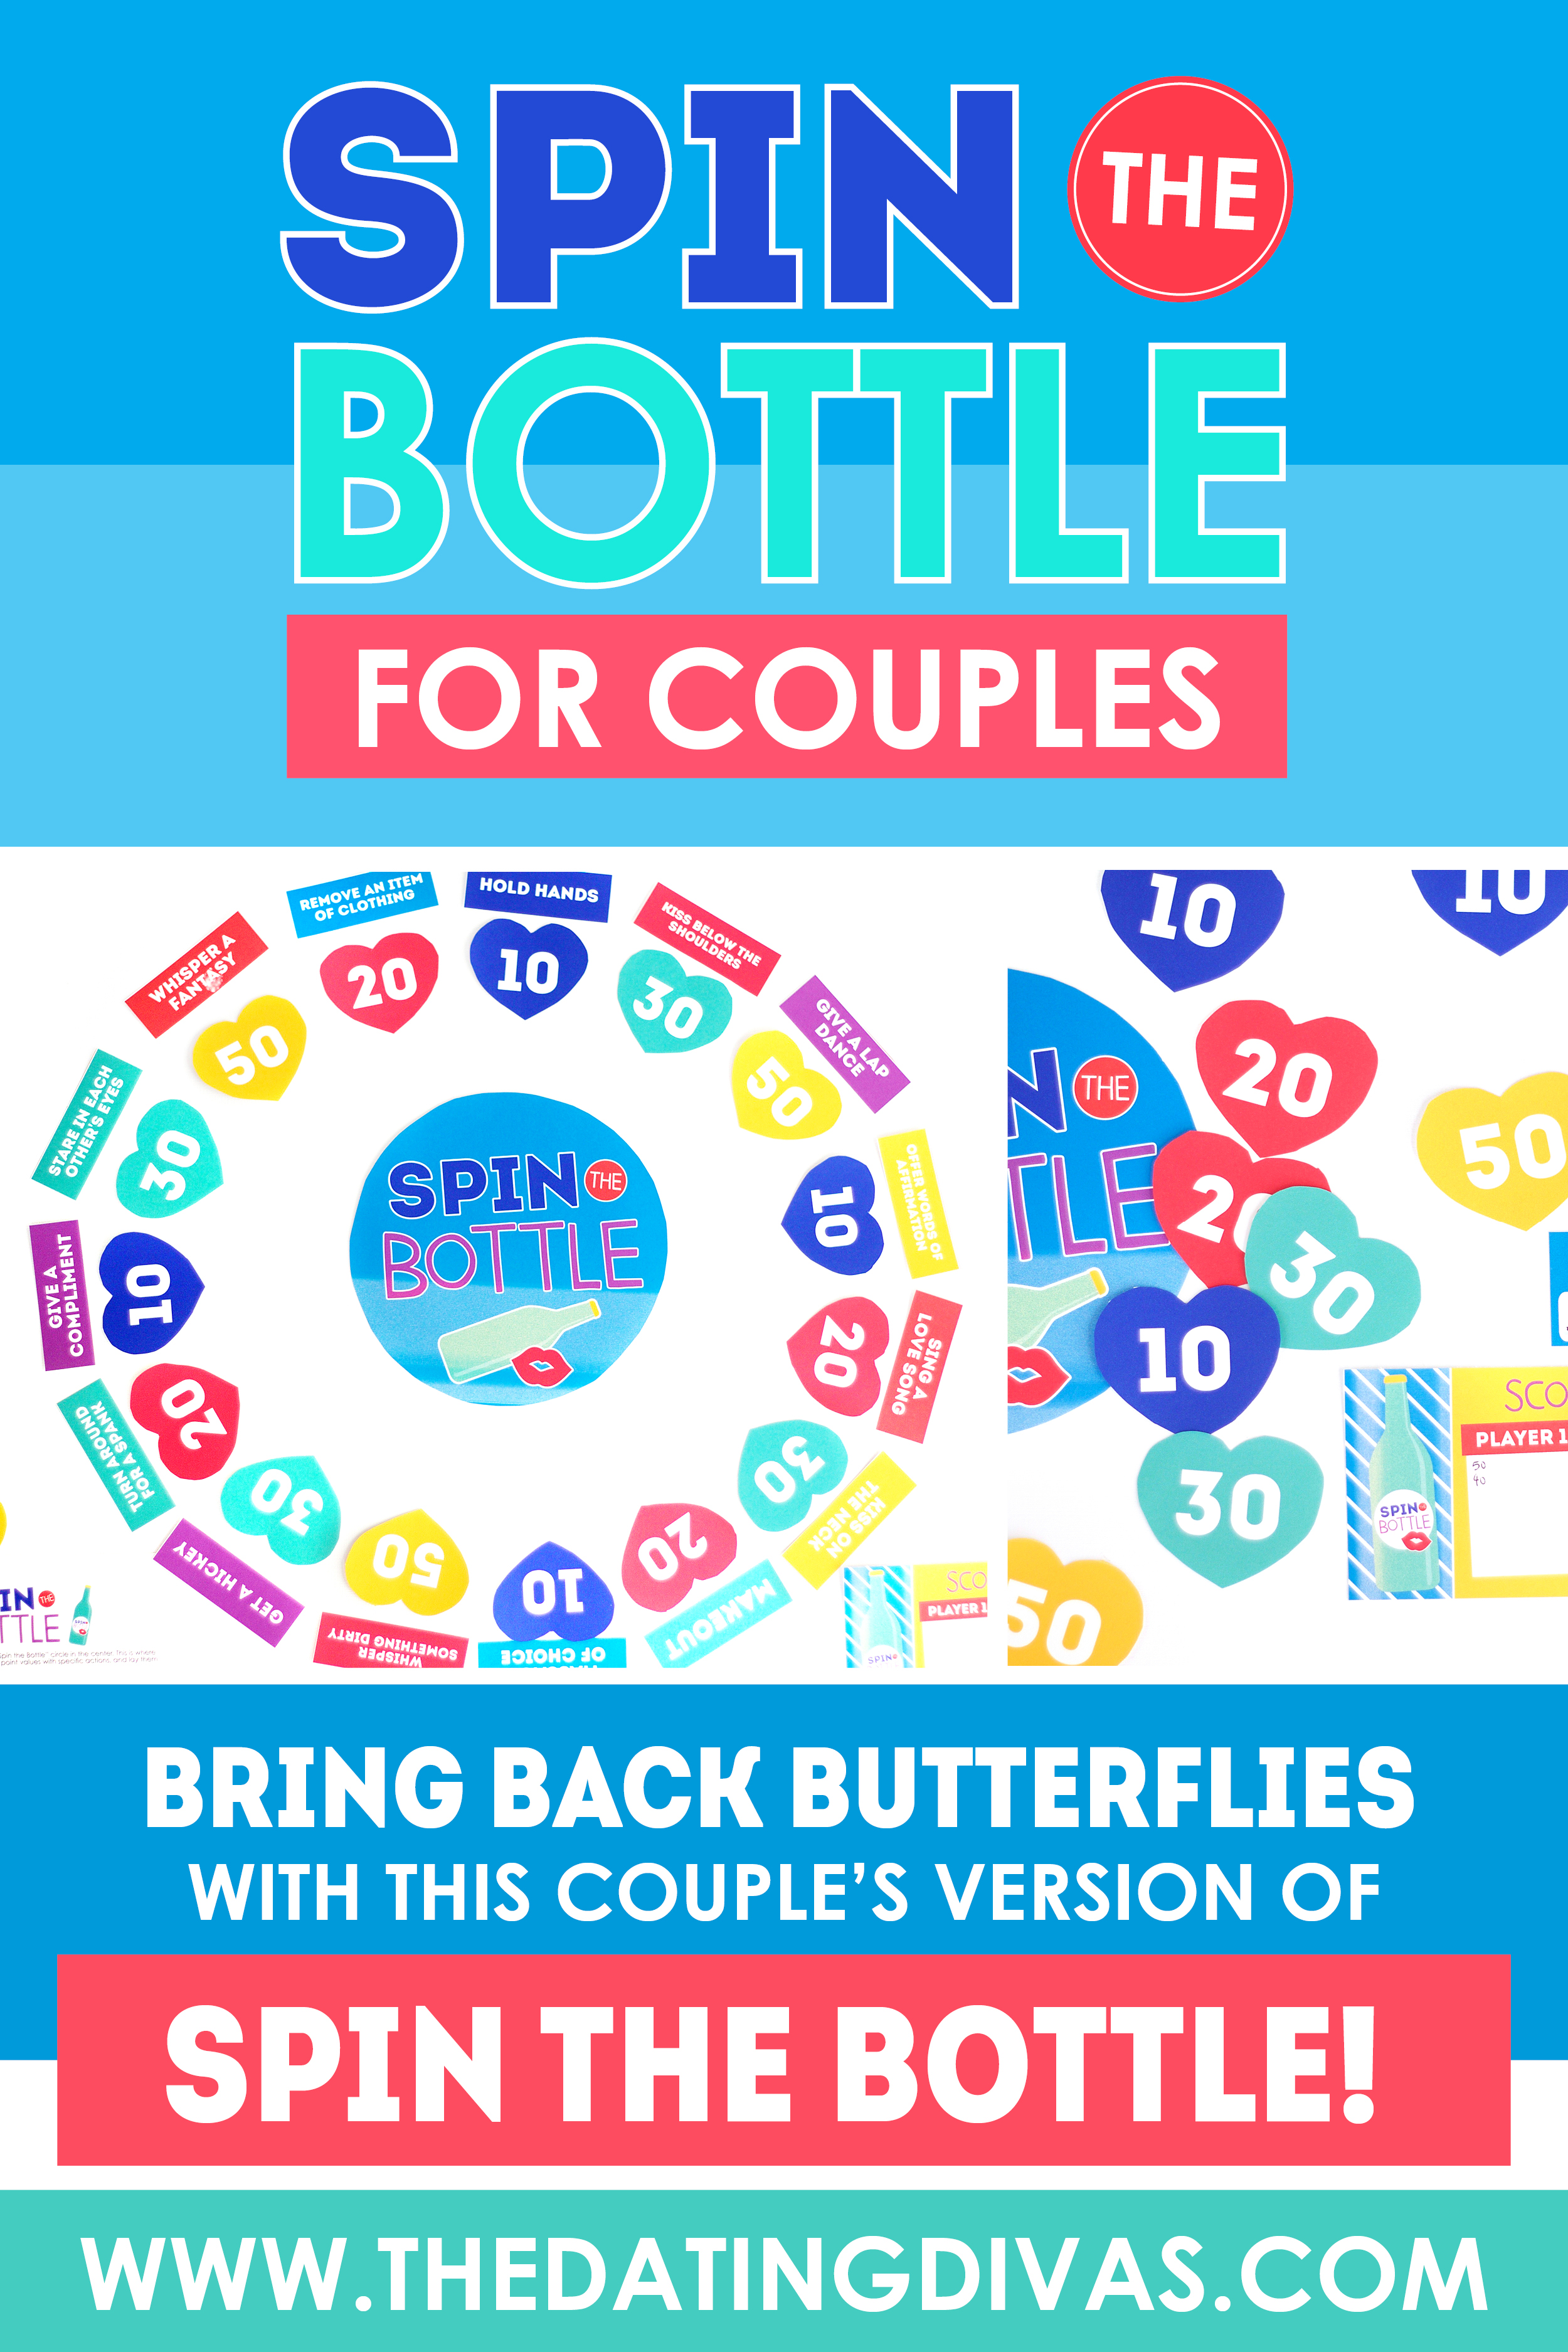 Turn up the heat in your marriage TONIGHT by playing this spicy version of spin the bottle! A romantic DIY bedroom game for couples! #spinthebottle #bedroomgame